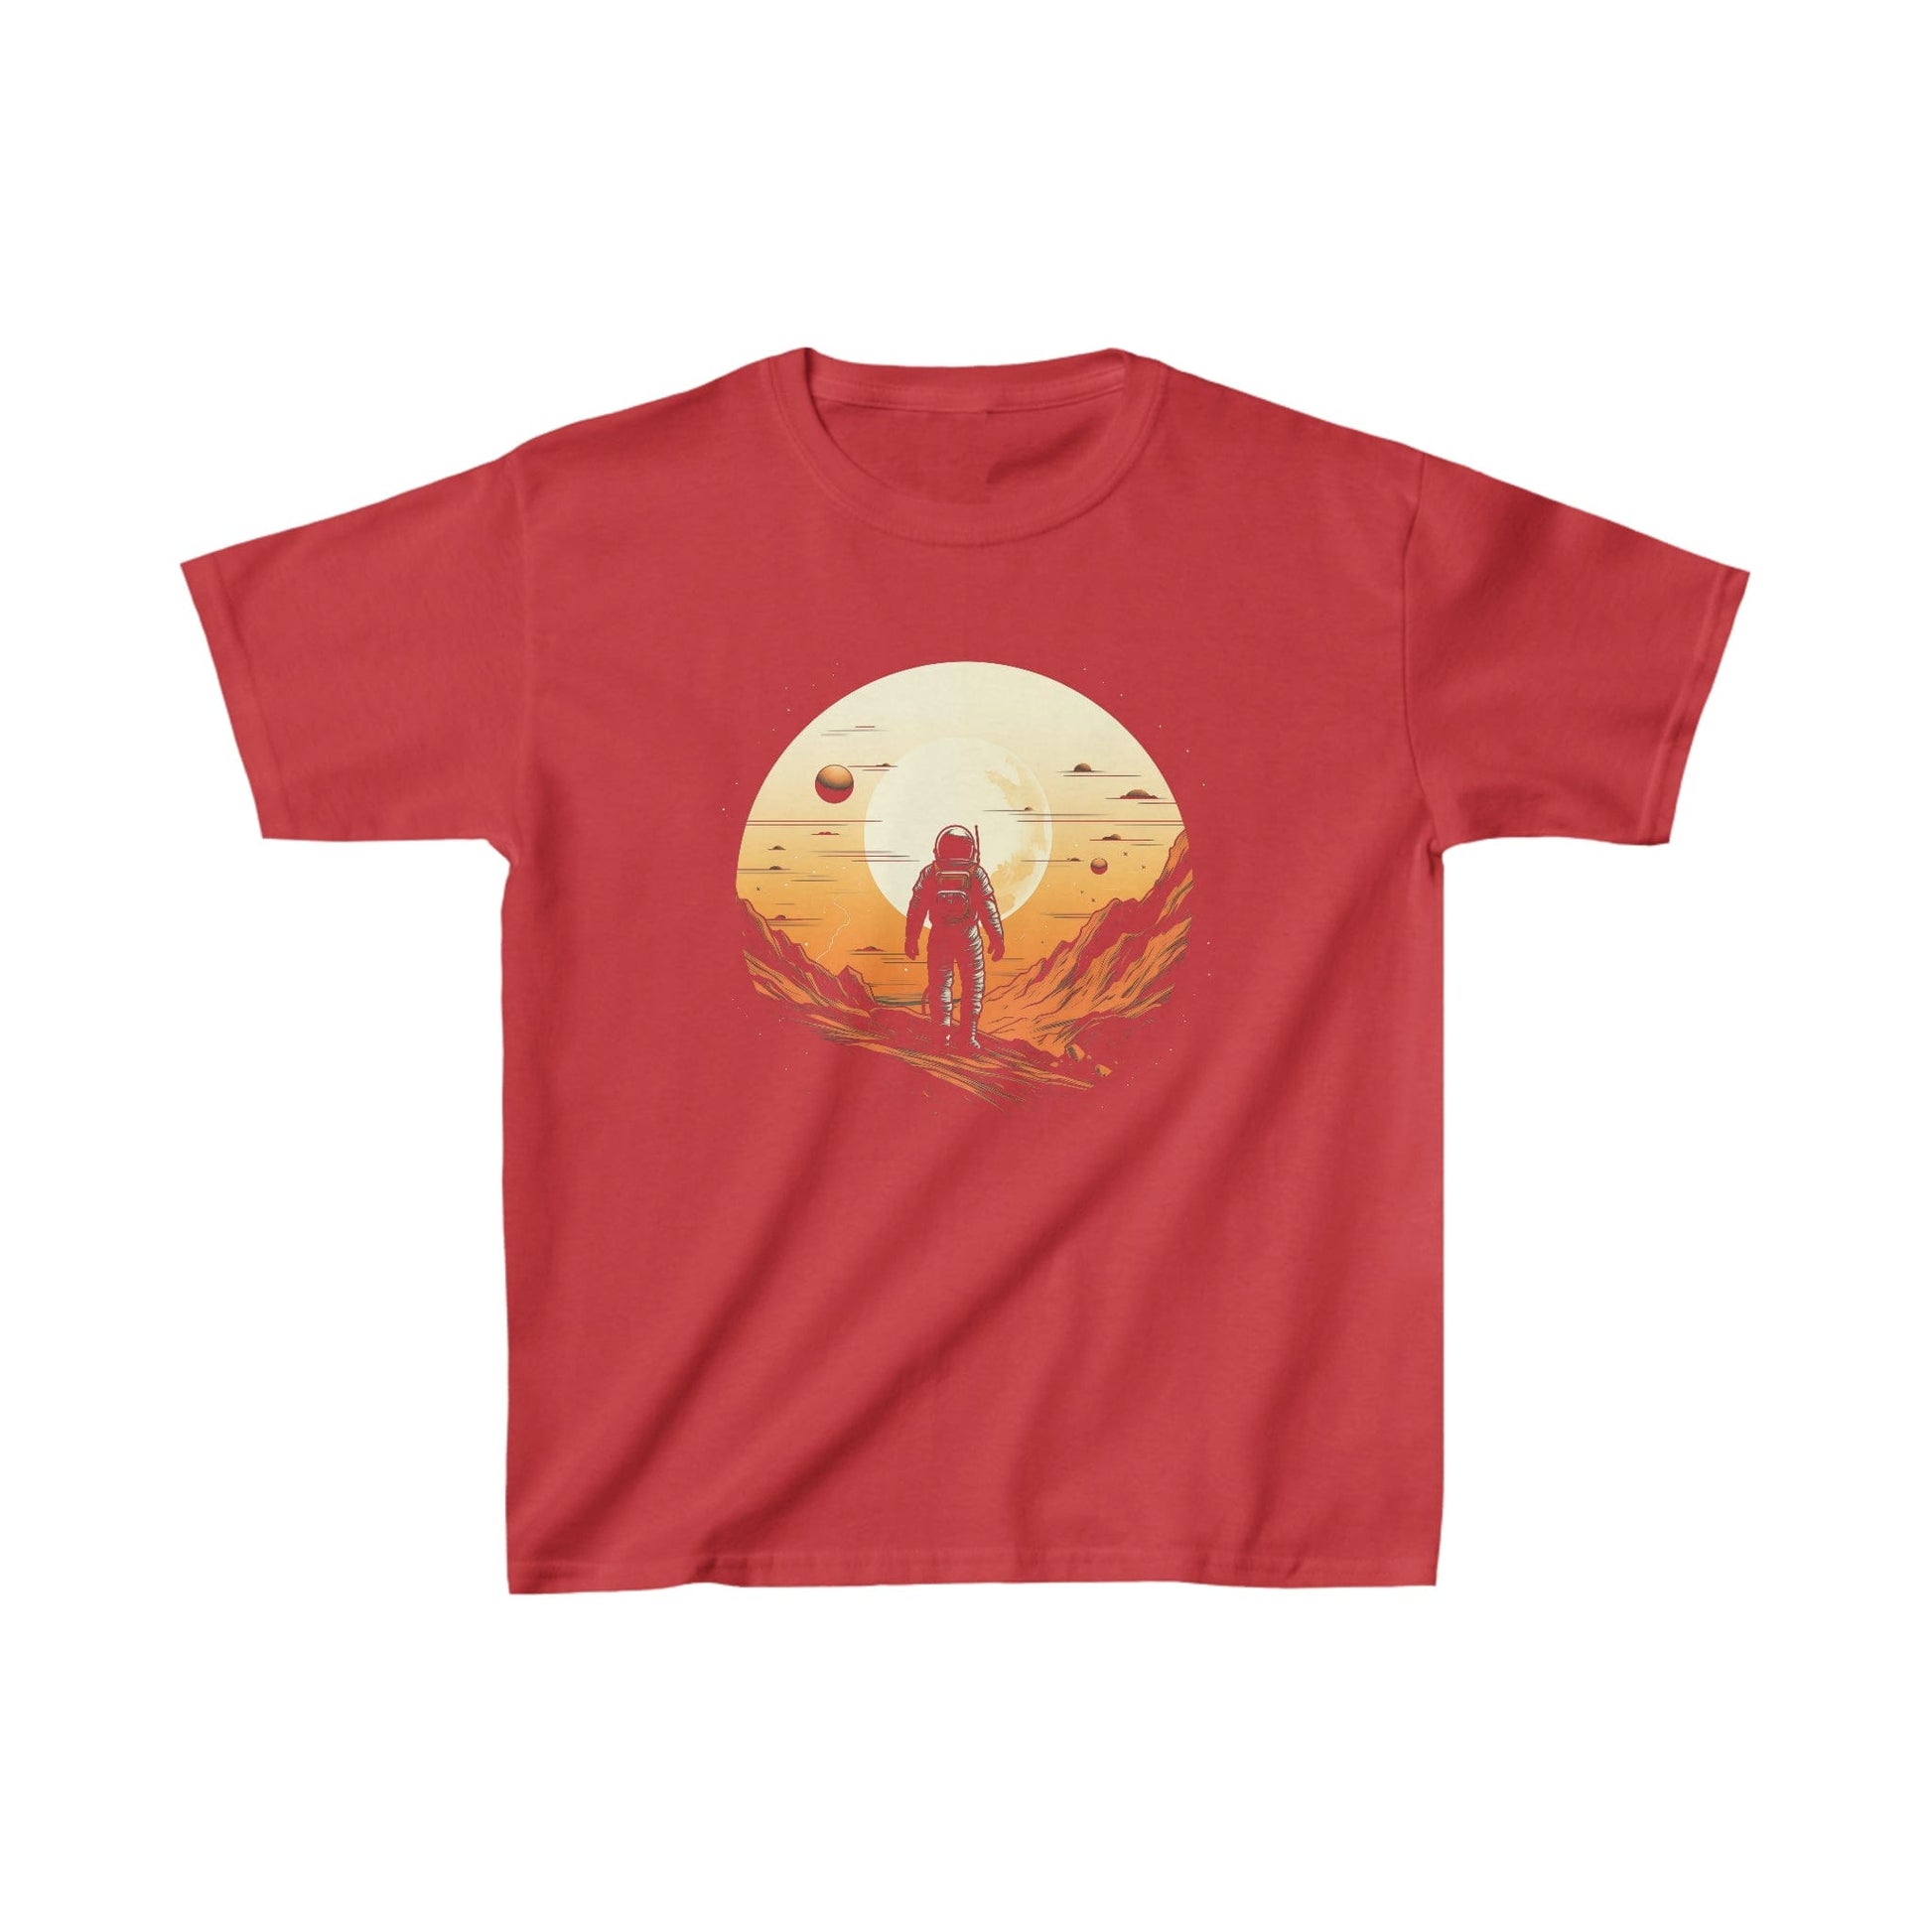 Kids clothes XS / Red Youth Lunar Explorer: Astronaut on the Moon T-Shirt